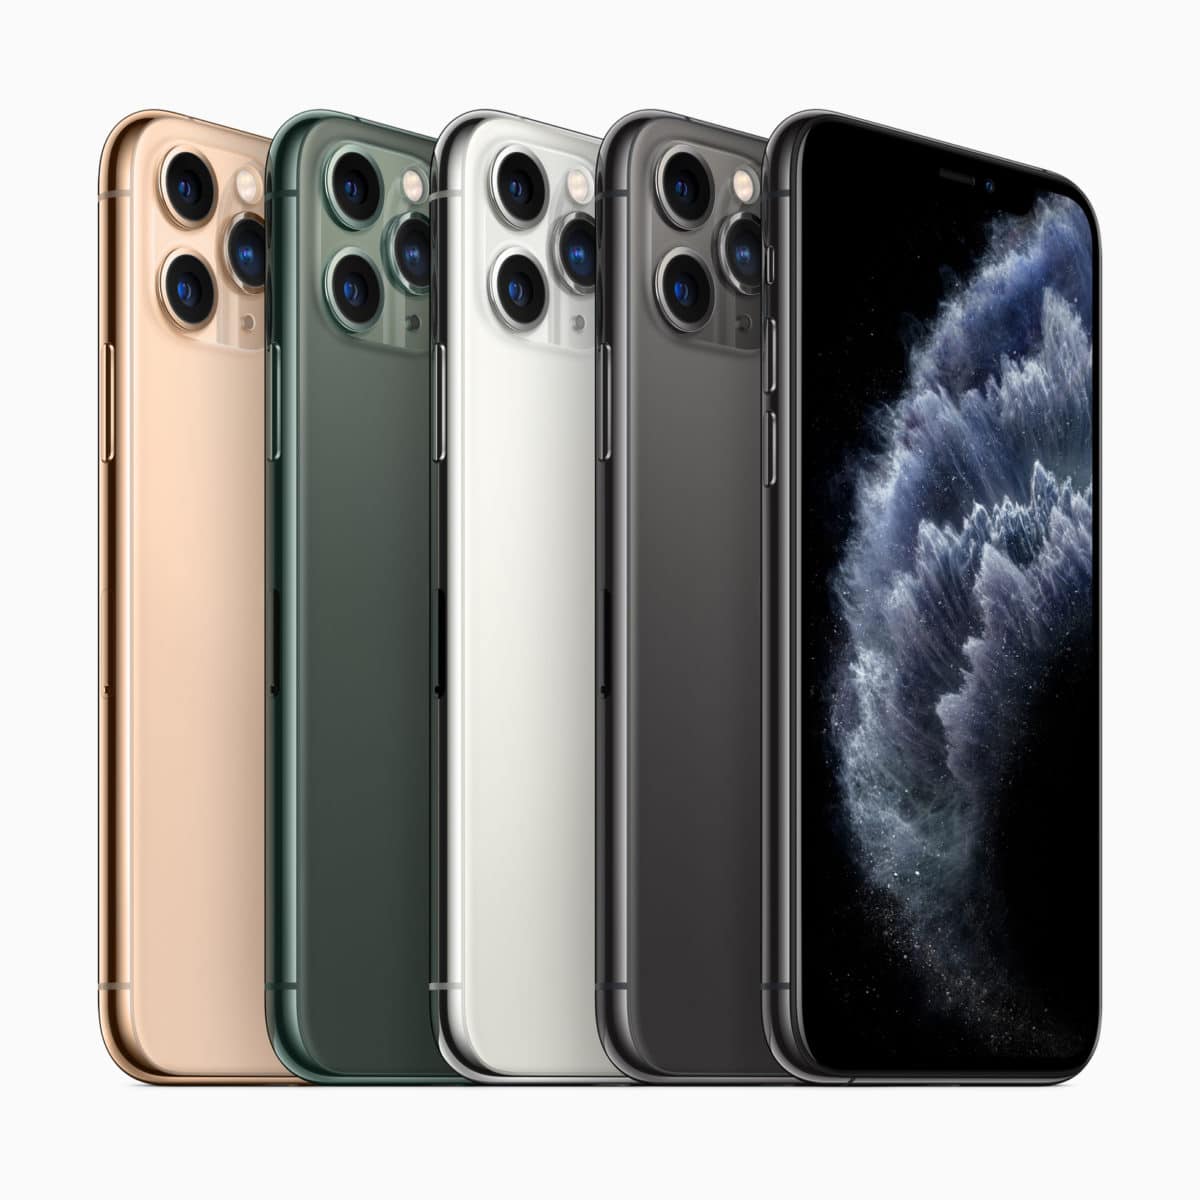 Which Color Iphone 11 Pro Should You Buy Space Gray Midnight Green Gold Or Silver